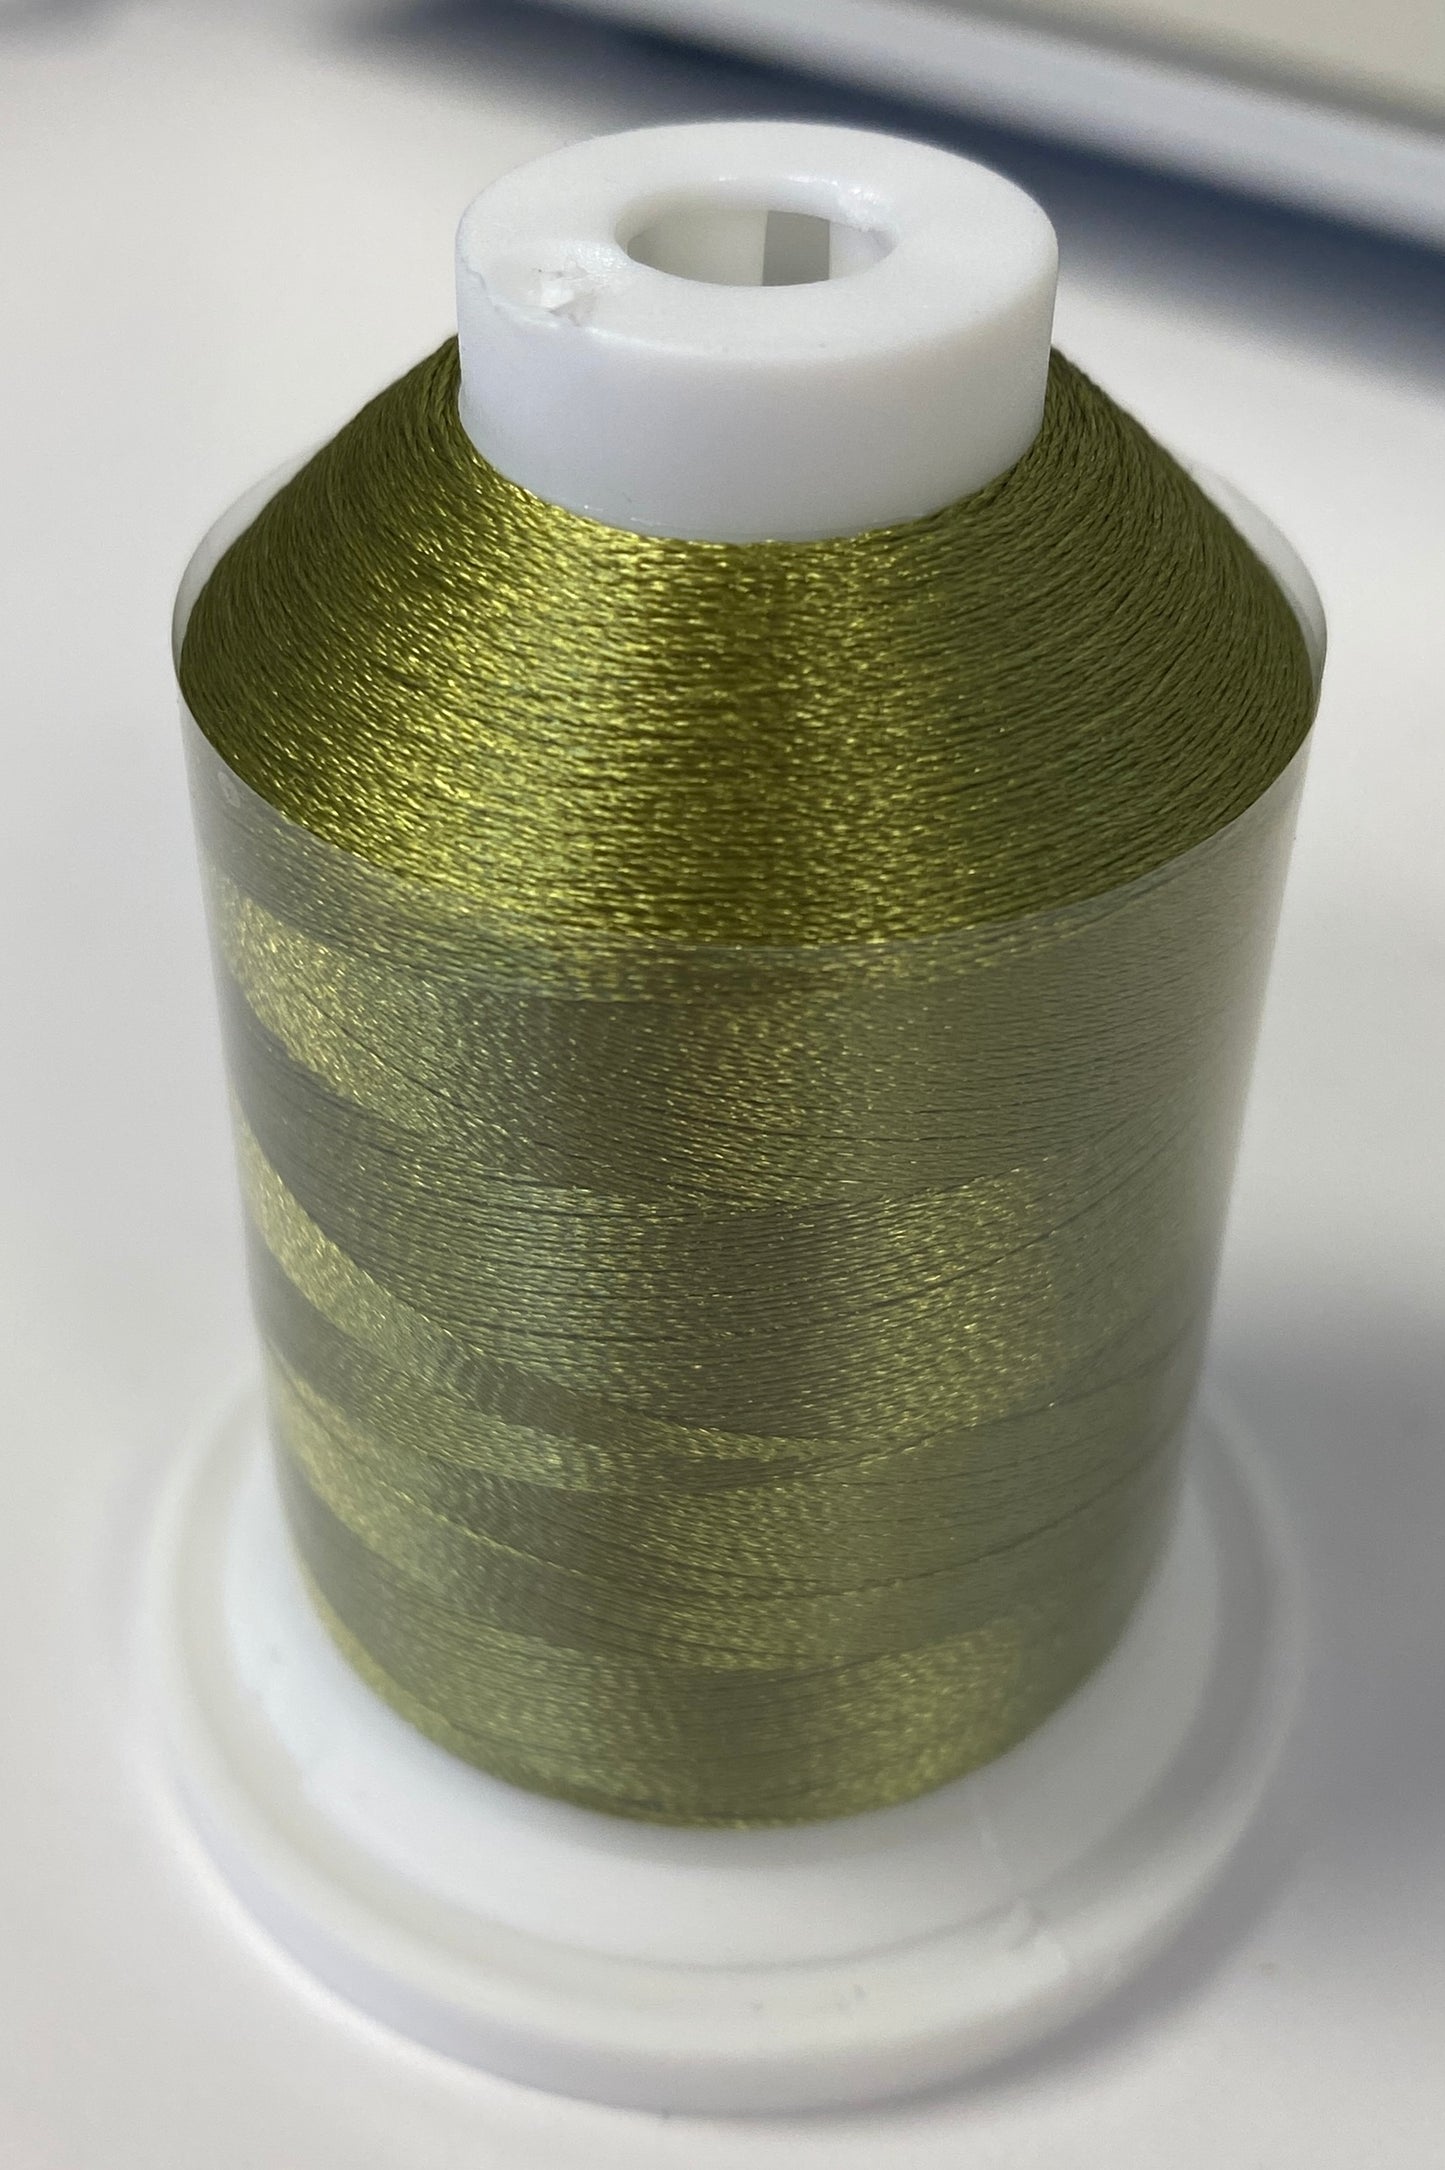 Brother Pacesetter Embroidery Thread - Greens